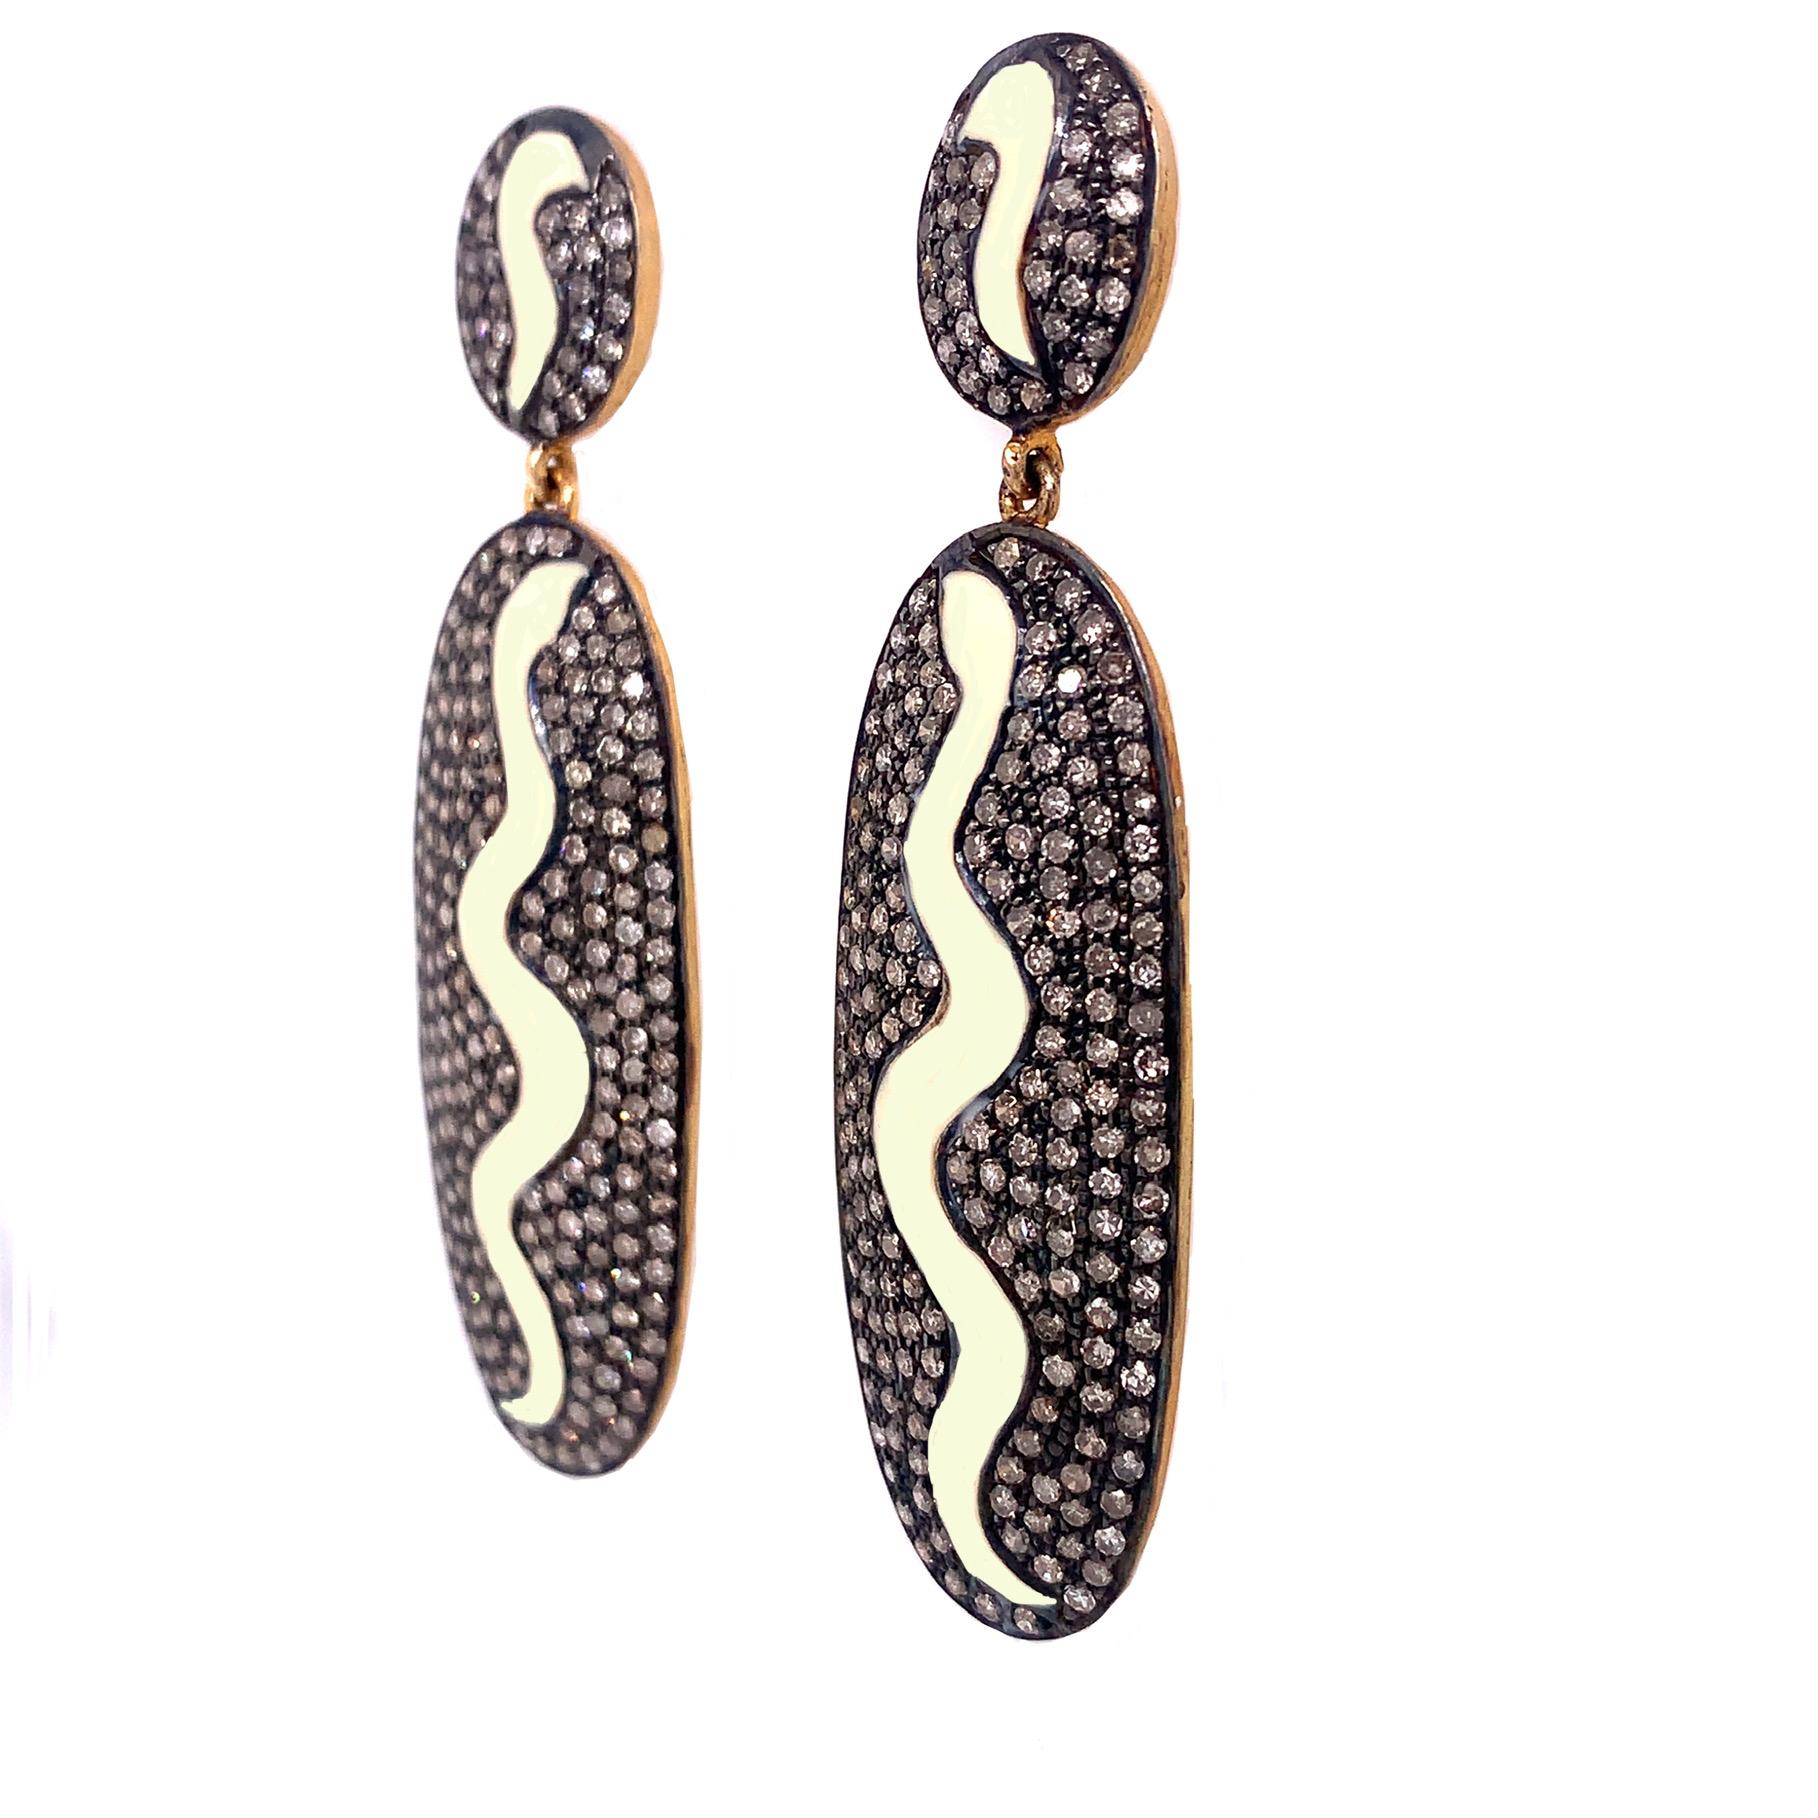 Contemporary Lucea New York Rustic and Enamel Diamond Earrings For Sale